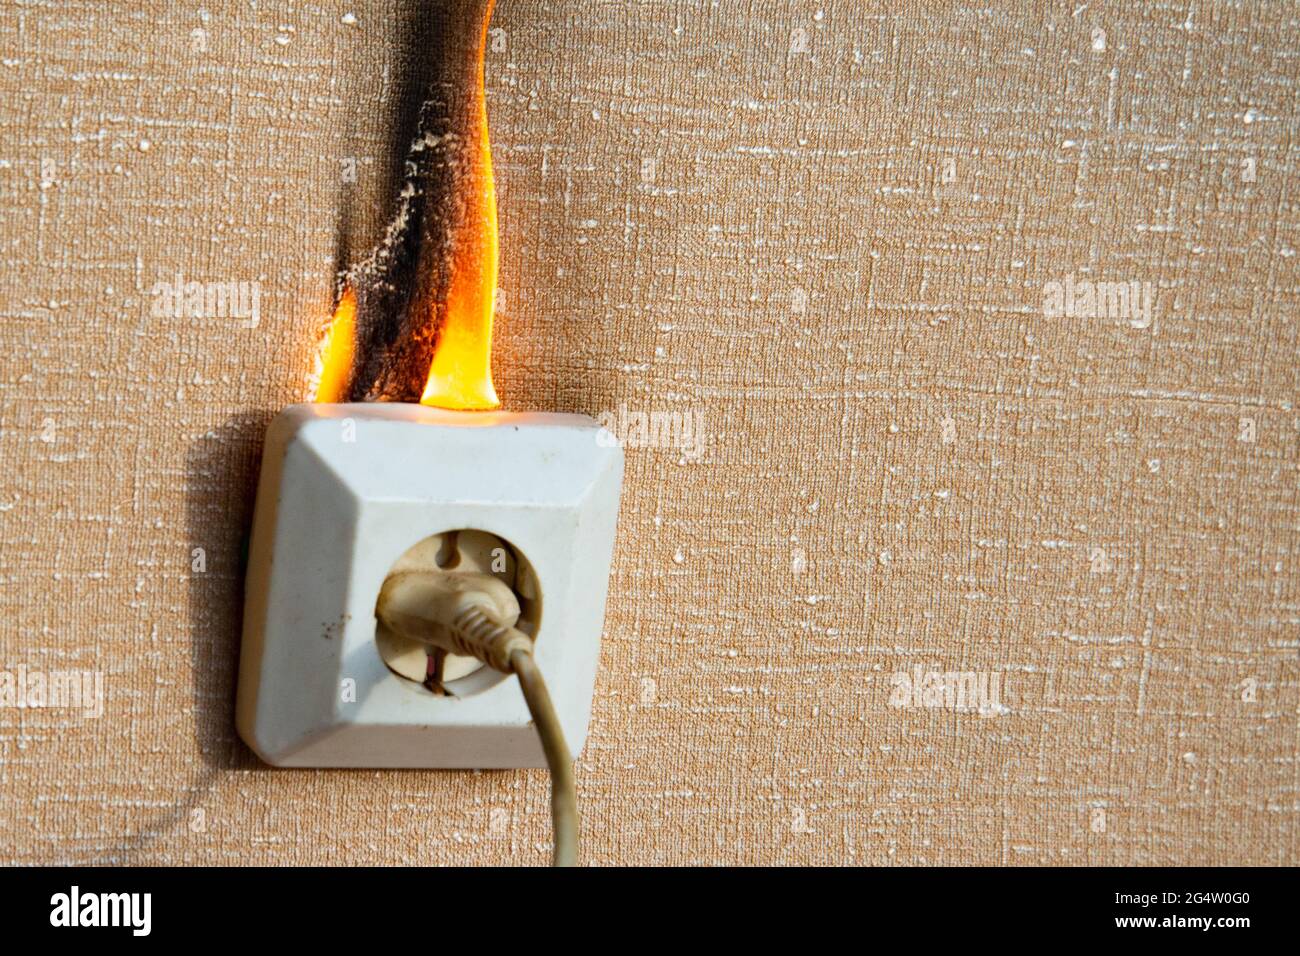 Defective wiring causes a fire. An old, worn out socket requiring replacement. The power outlet starts to light up. Burning electrical wiring and Stock Photo